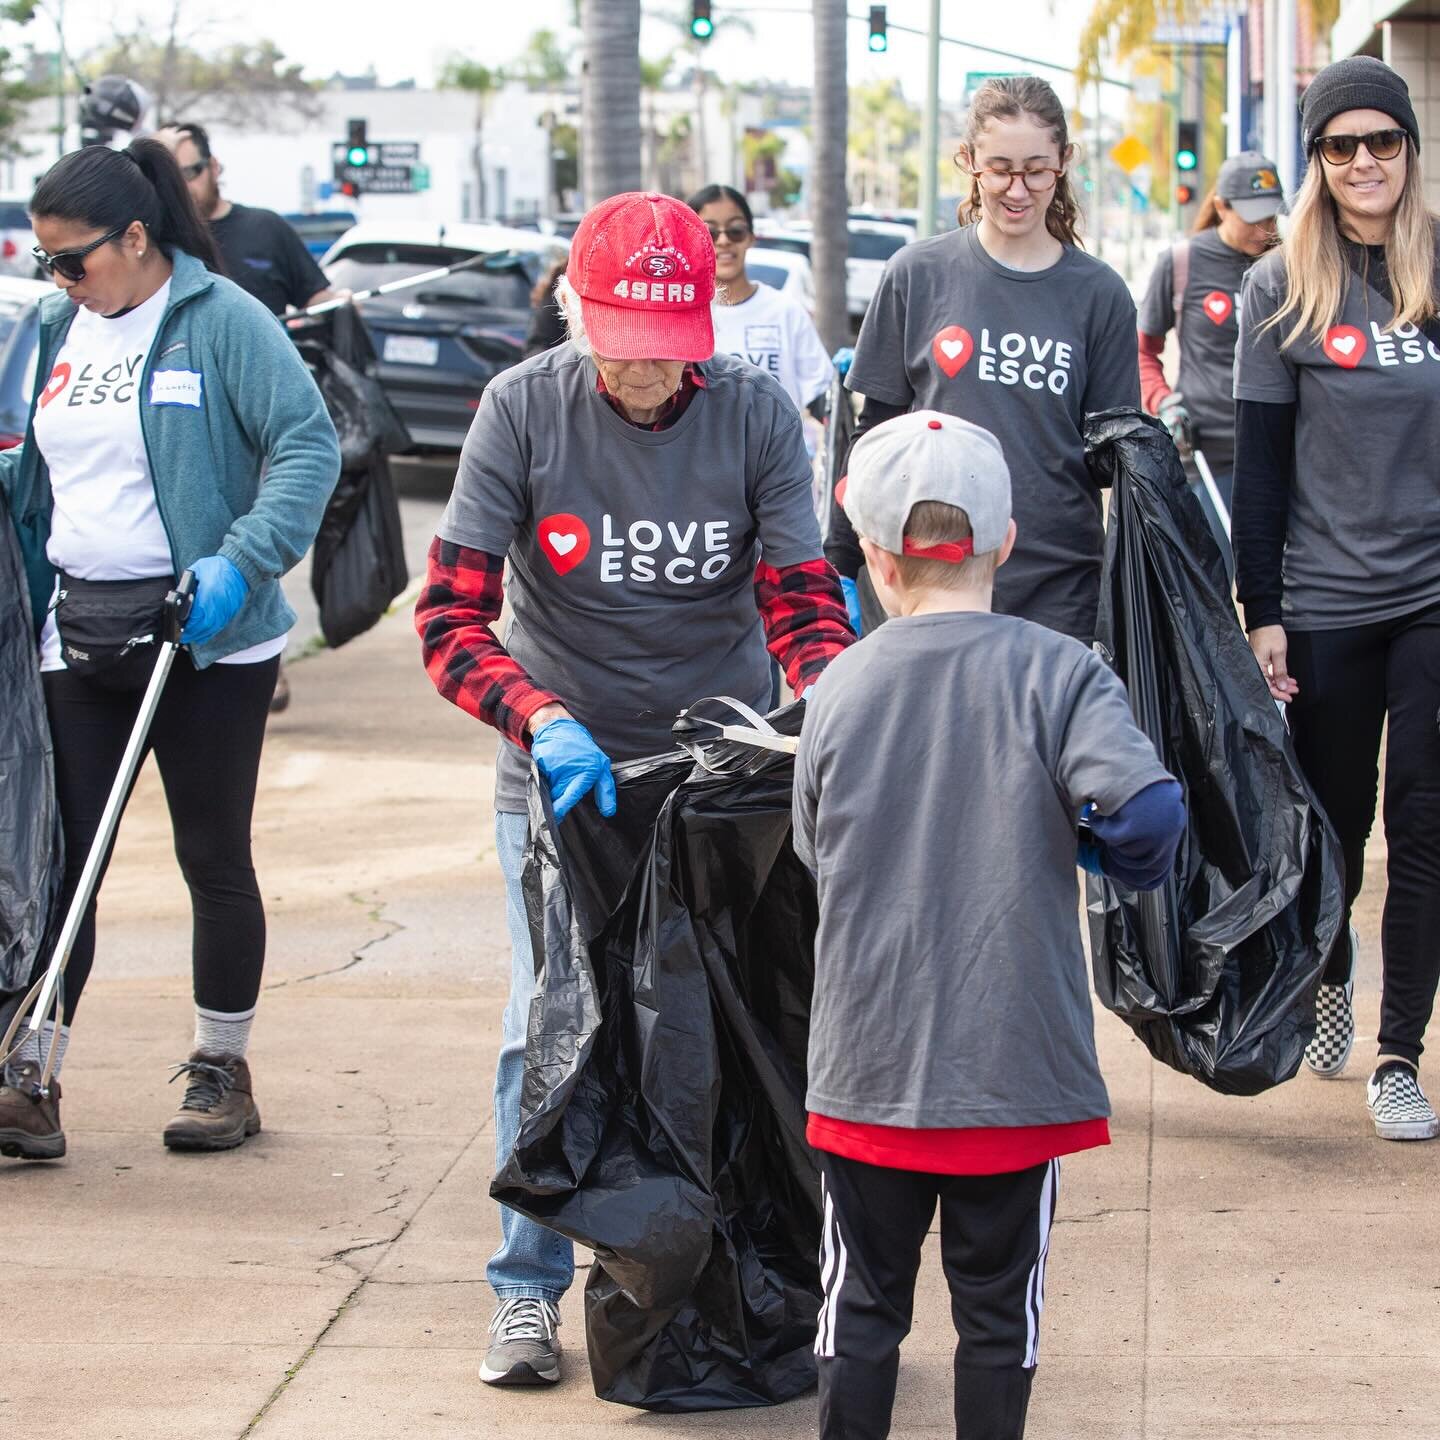 Thank you to our 700+ volunteers who came out on Love Esco Day to build gardens at @rocksprings_eusd @miller_elementary_eusd, clean up Downtown Escondido with @escondidostreetstewards, Dixon Lake, Grape Day Park, and the Escondido Creek, refresh the 